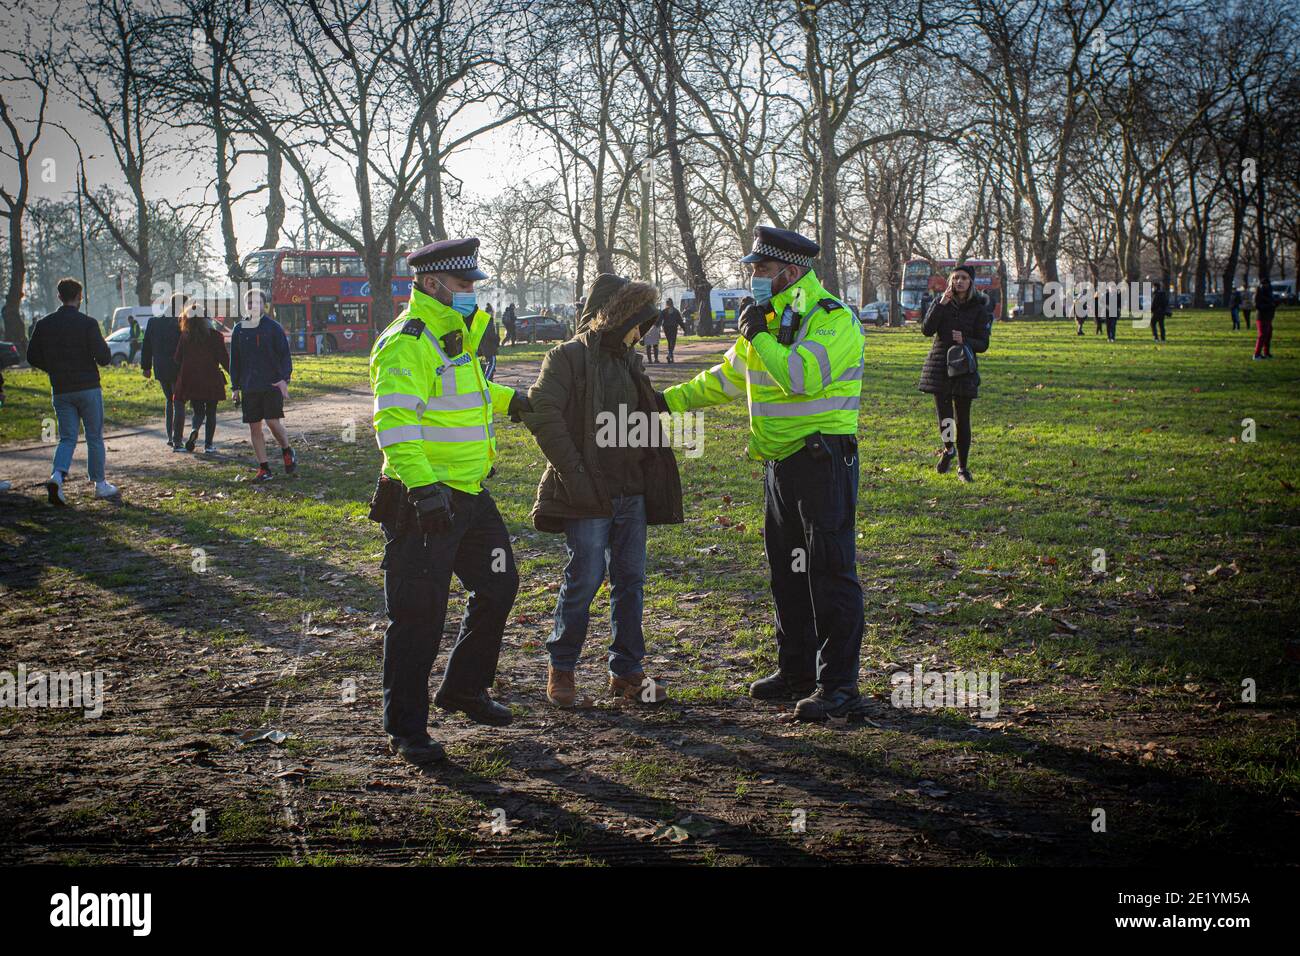 A protester is arrested  by Police on Clapham Common during the anti-lockdown demonstration on January 9, 2021 in London, England.StandUpX are demonst Stock Photo